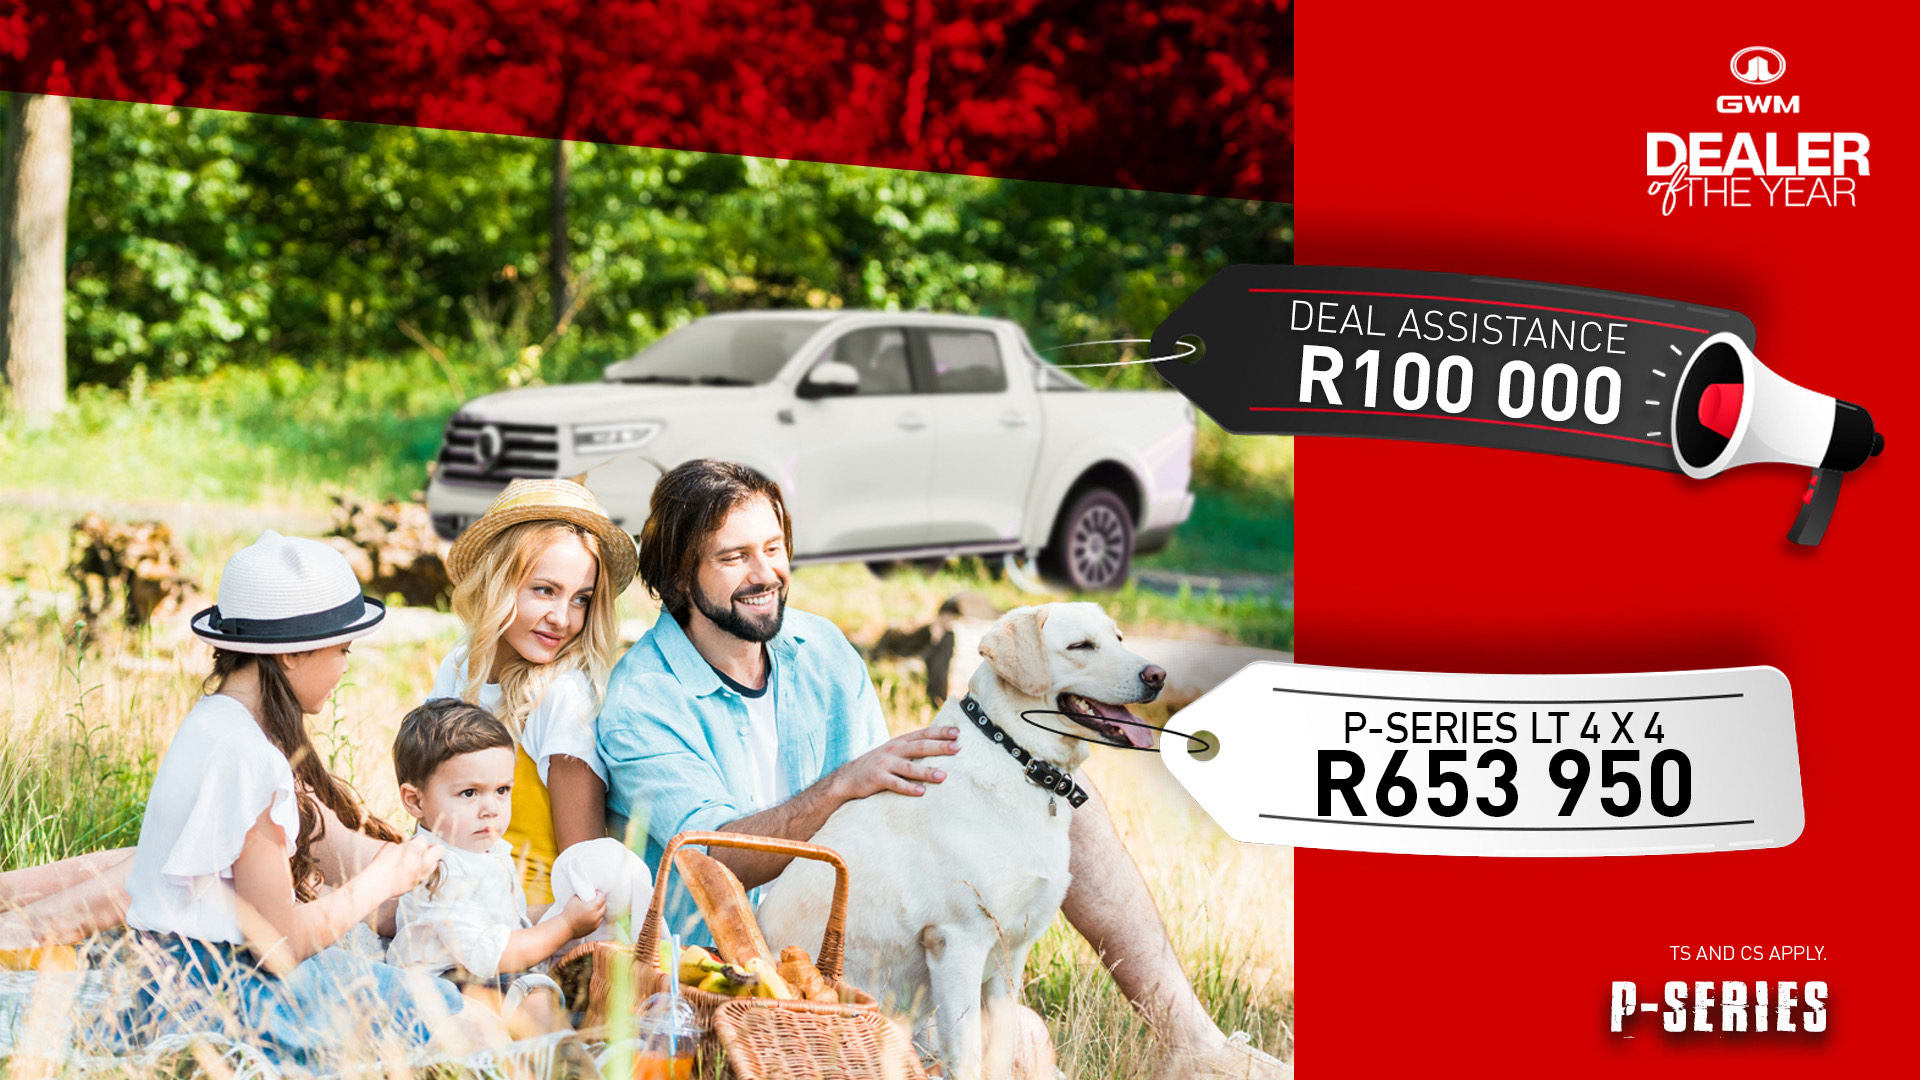 Get R100 000 deal assistance on the P- Series LT 4x4